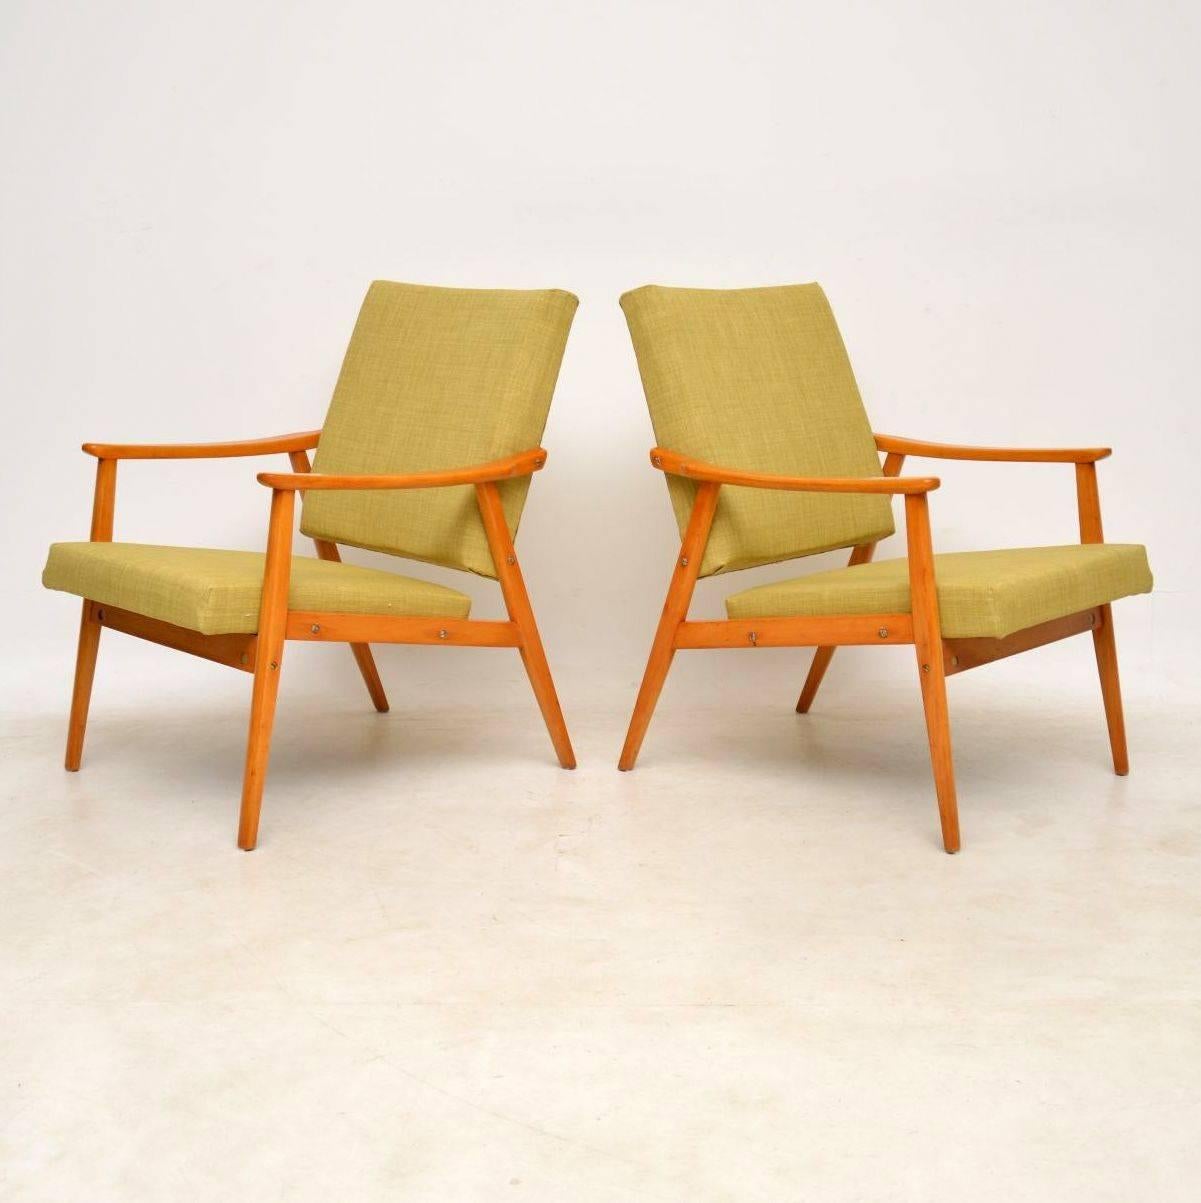 A stunning pair of vintage Danish armchairs, these date from around the 1950s-1960s. We have had the frames fully stripped and re-polished, the seats have also been fully re-upholstered in our light green fabric; the condition is excellent